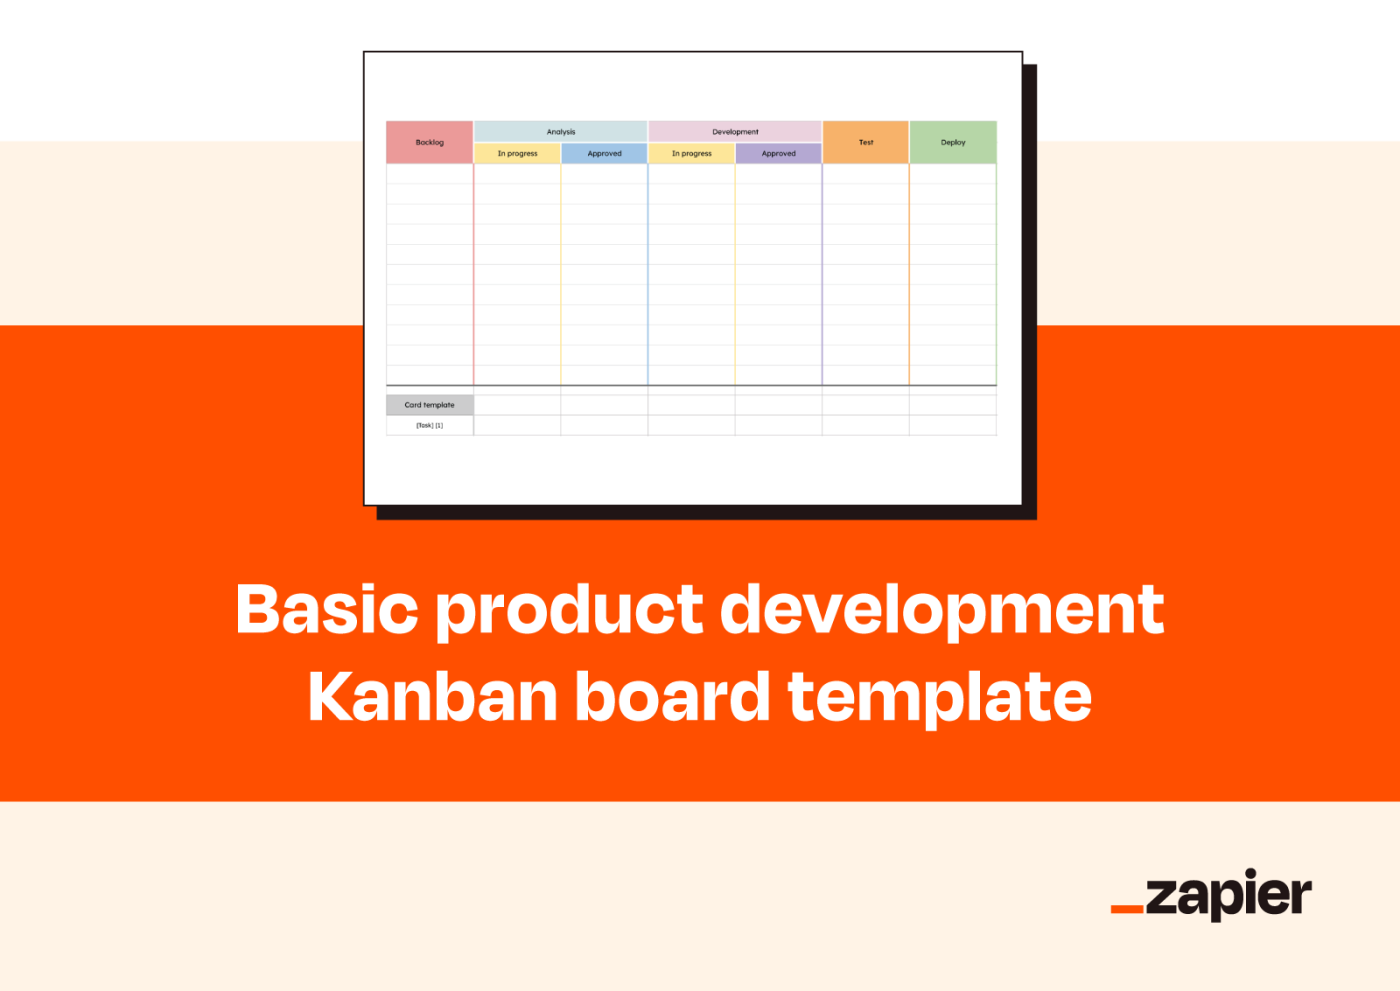 Graphic reading Basic product development Kanban board template with screenshot of the template.